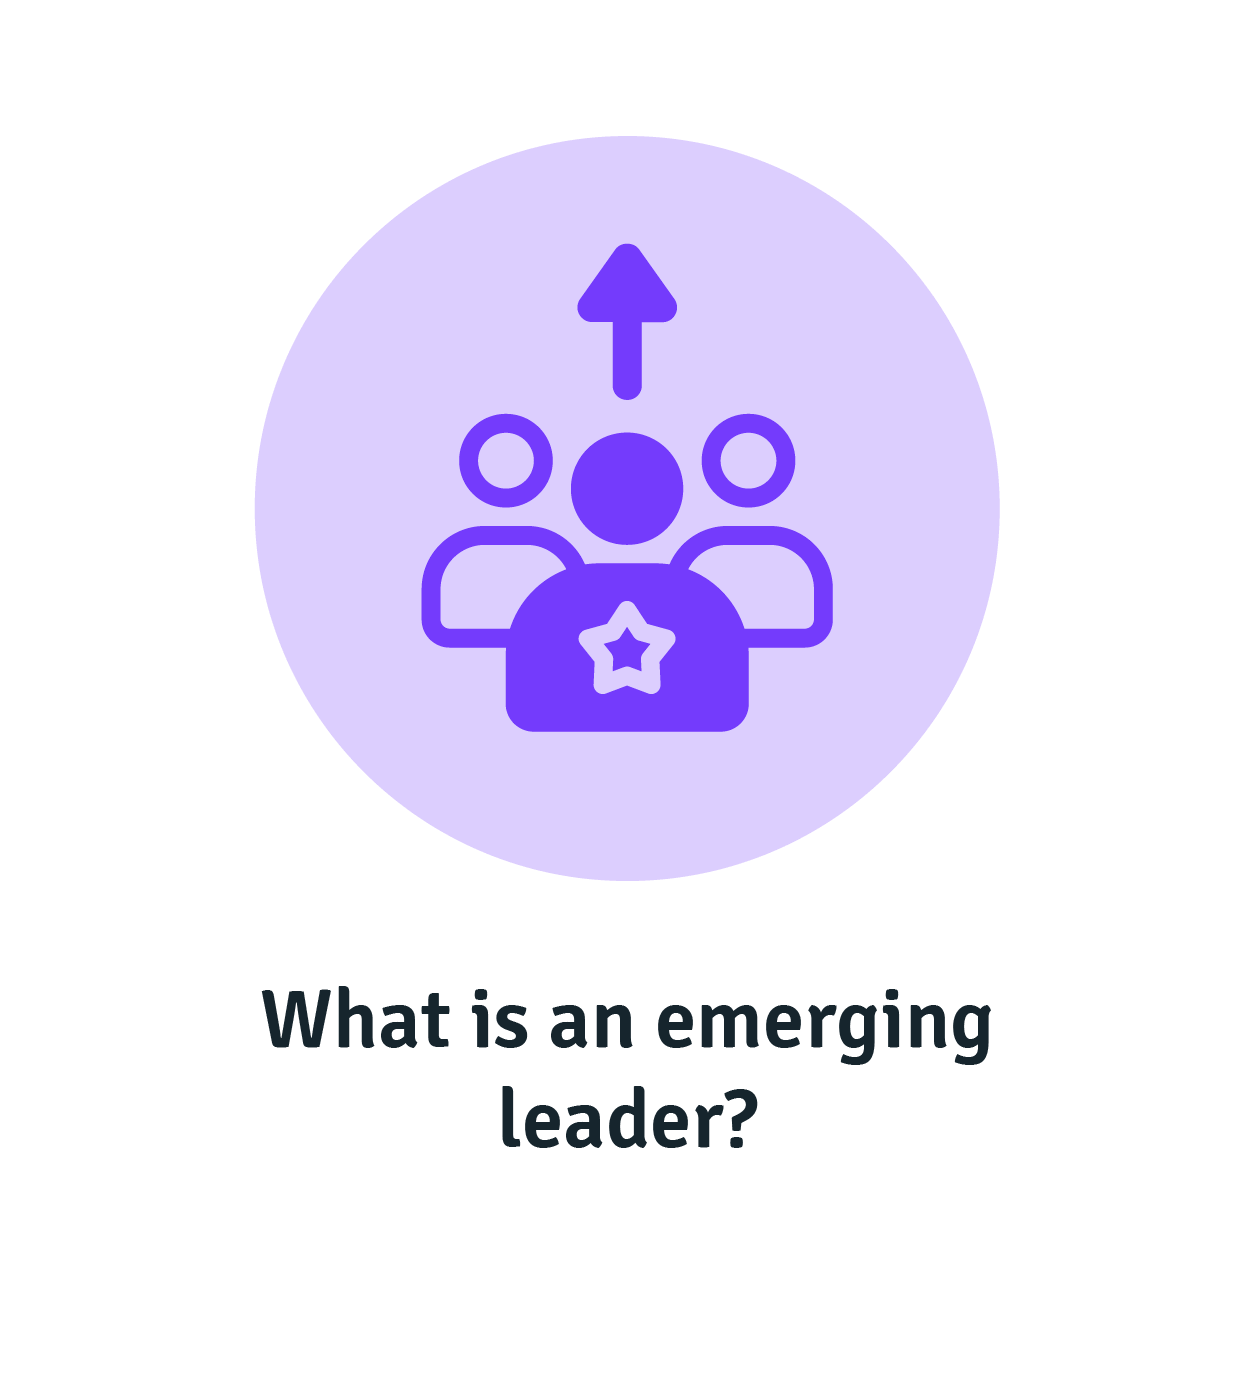 What is an emerging leader?